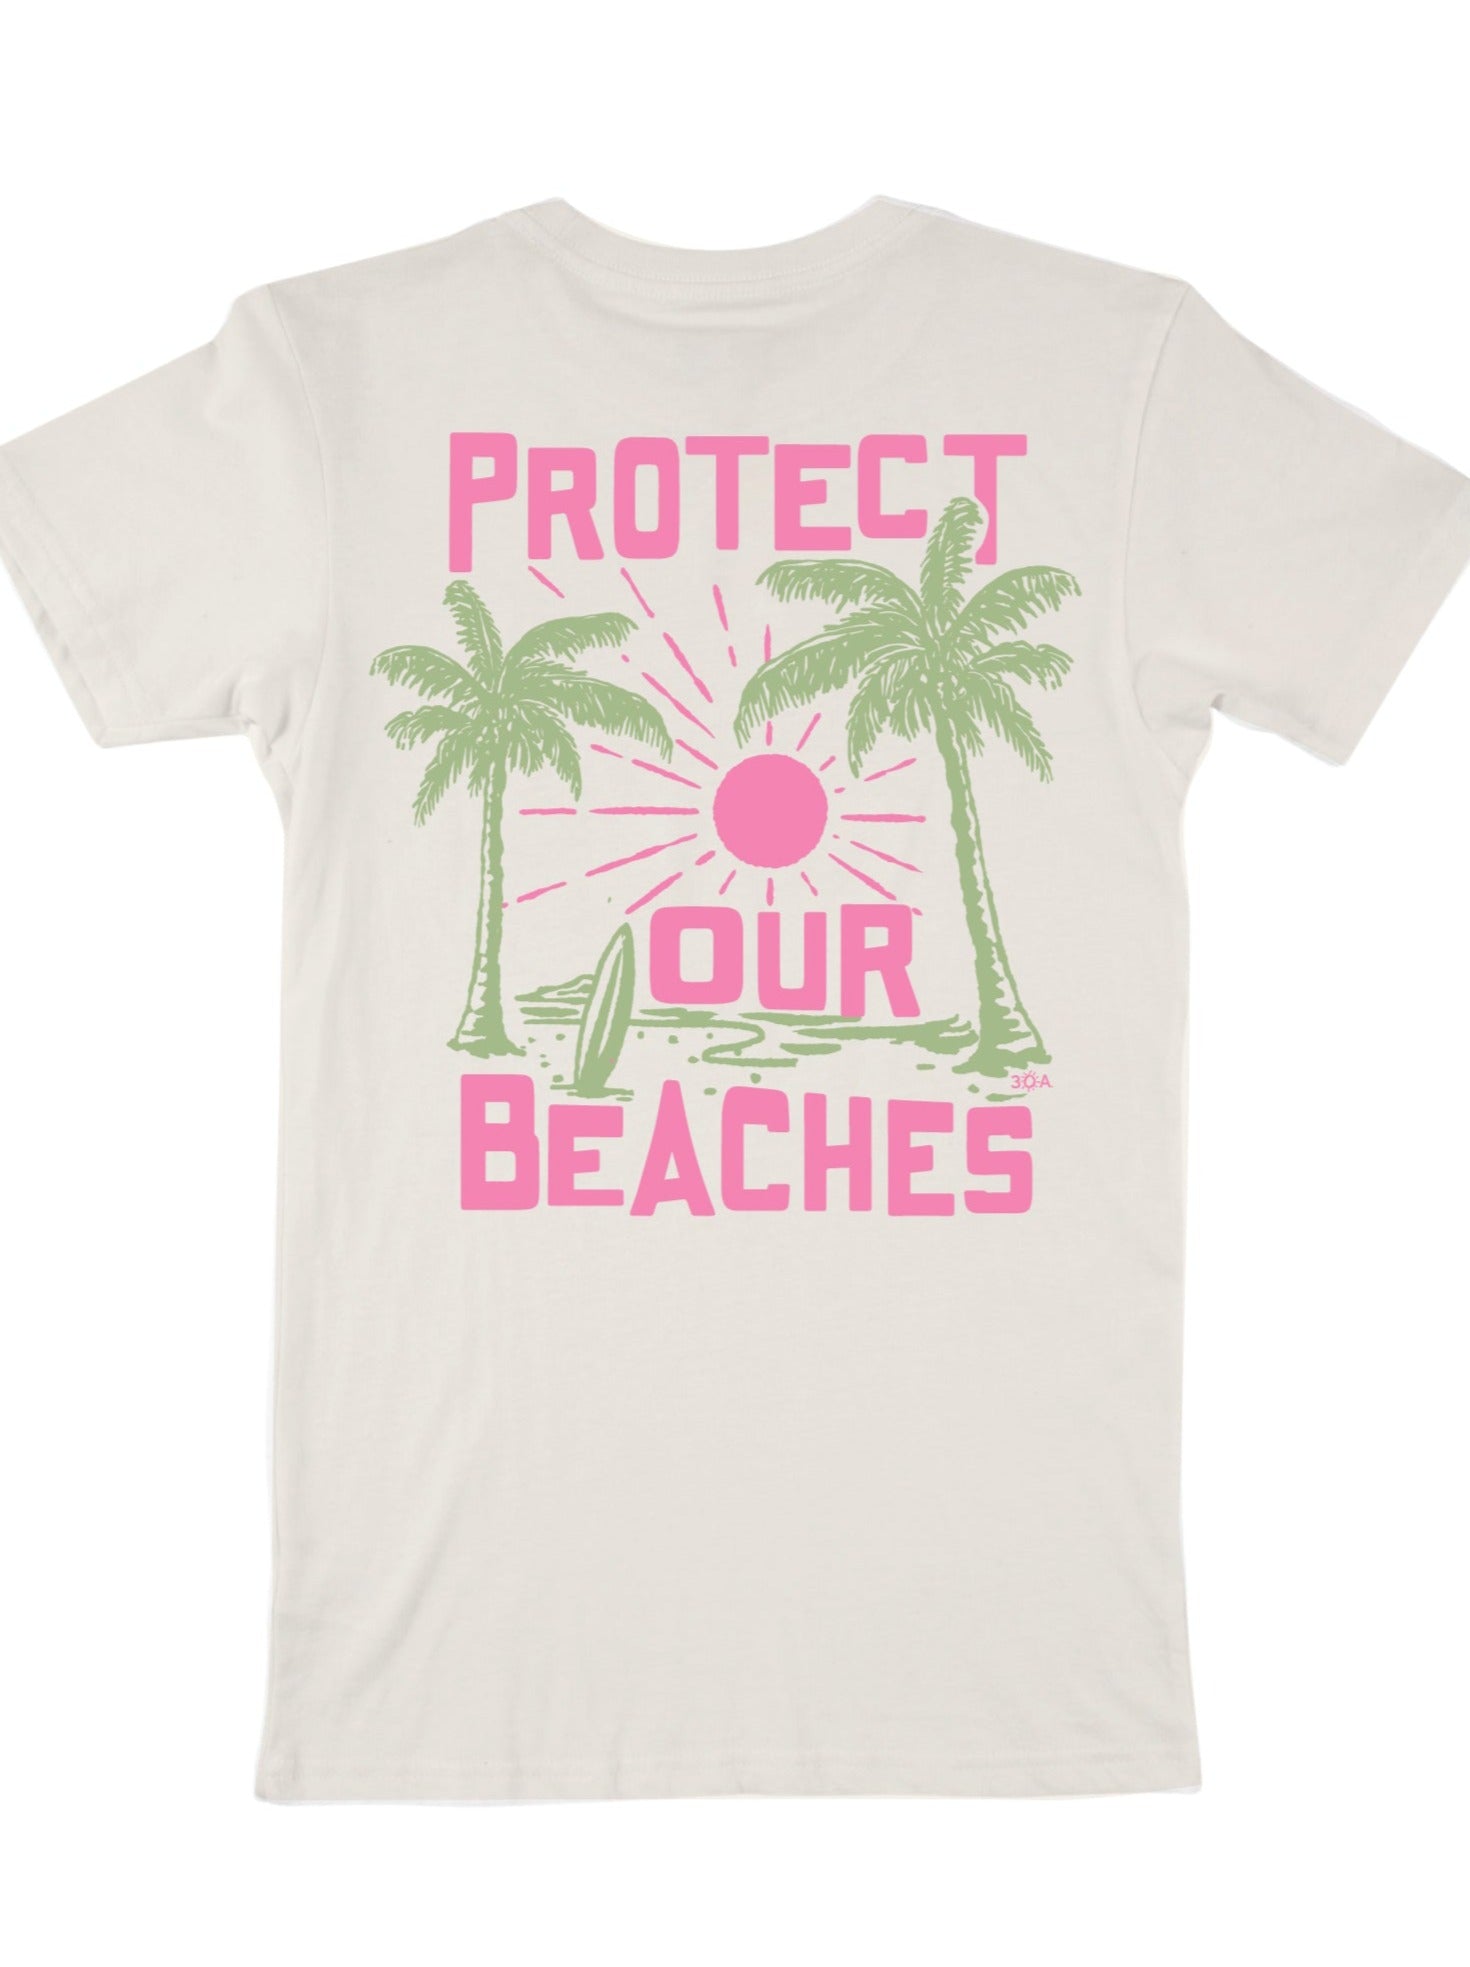 Tropical Protect Our Beaches T-Shirt